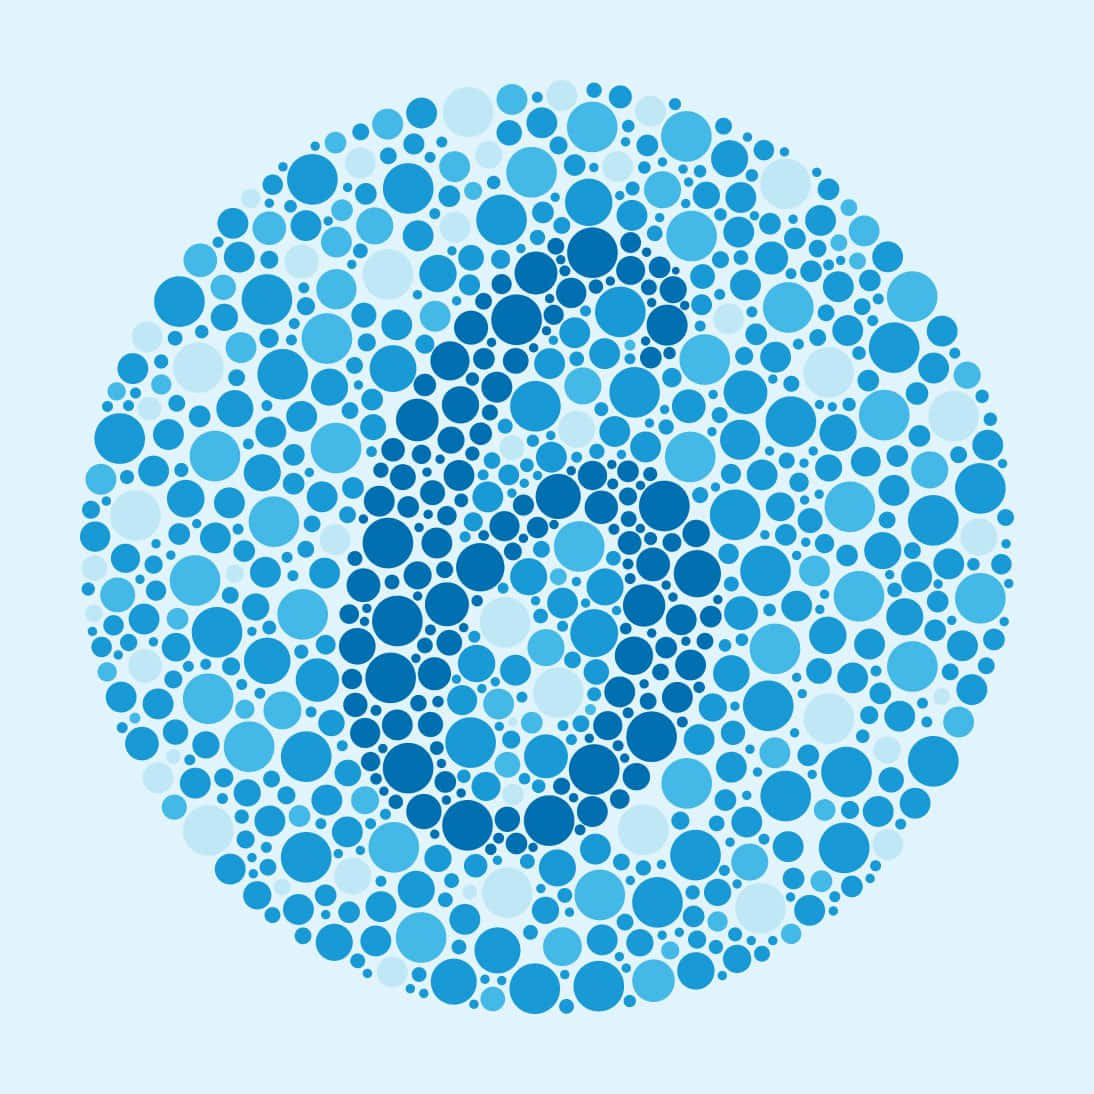 A Blue Circle With Dots In It